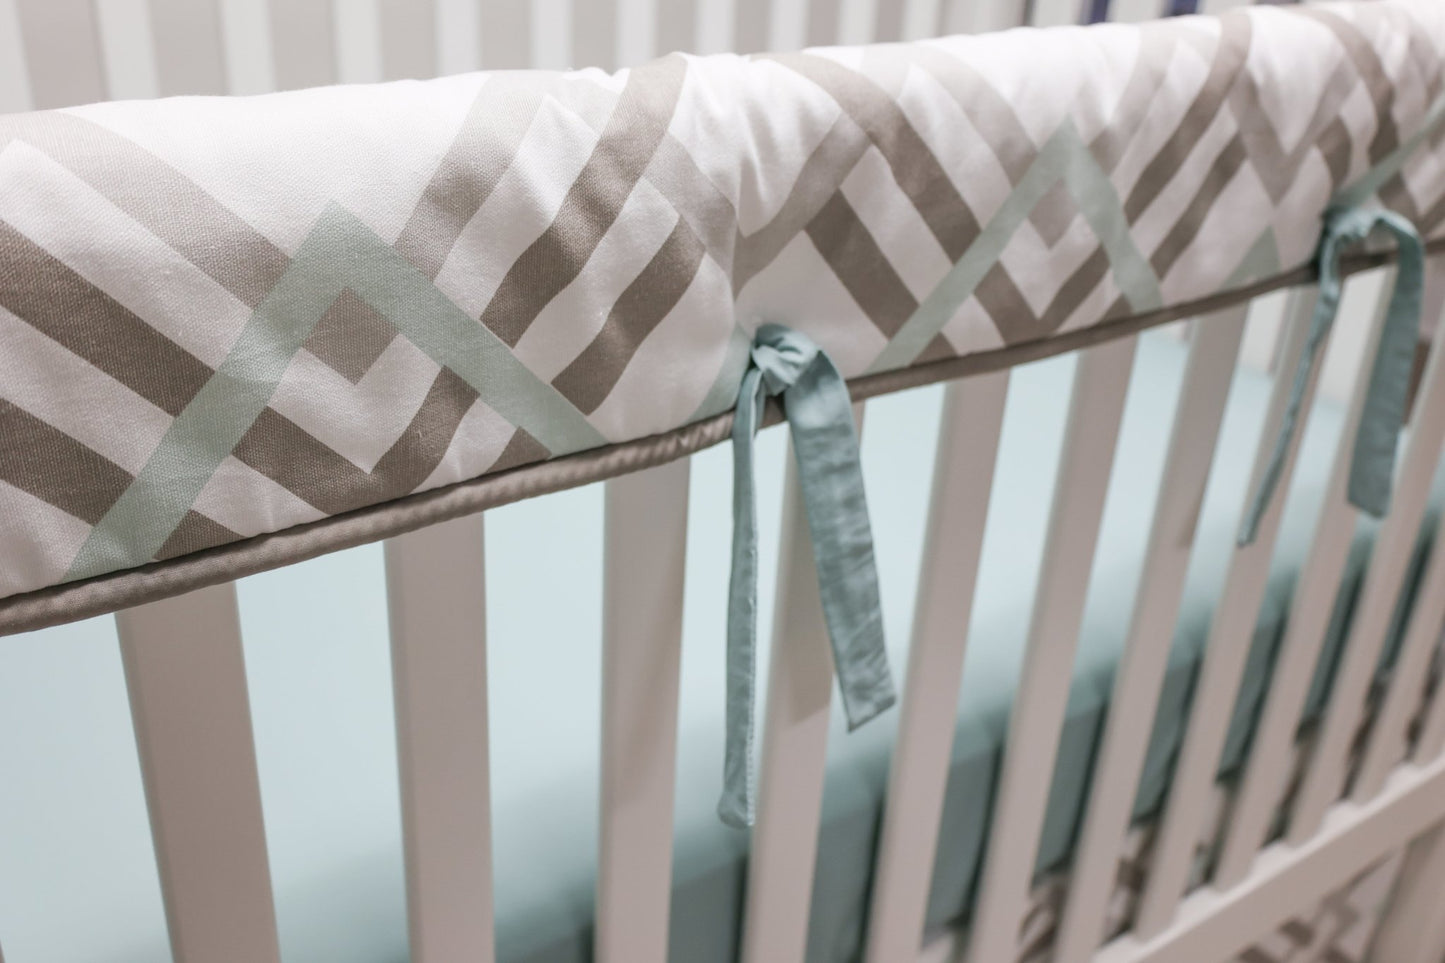 Robins Egg and Taupe Geometric Crib Bedding - 3 Piece Set - New Arrivals Inc